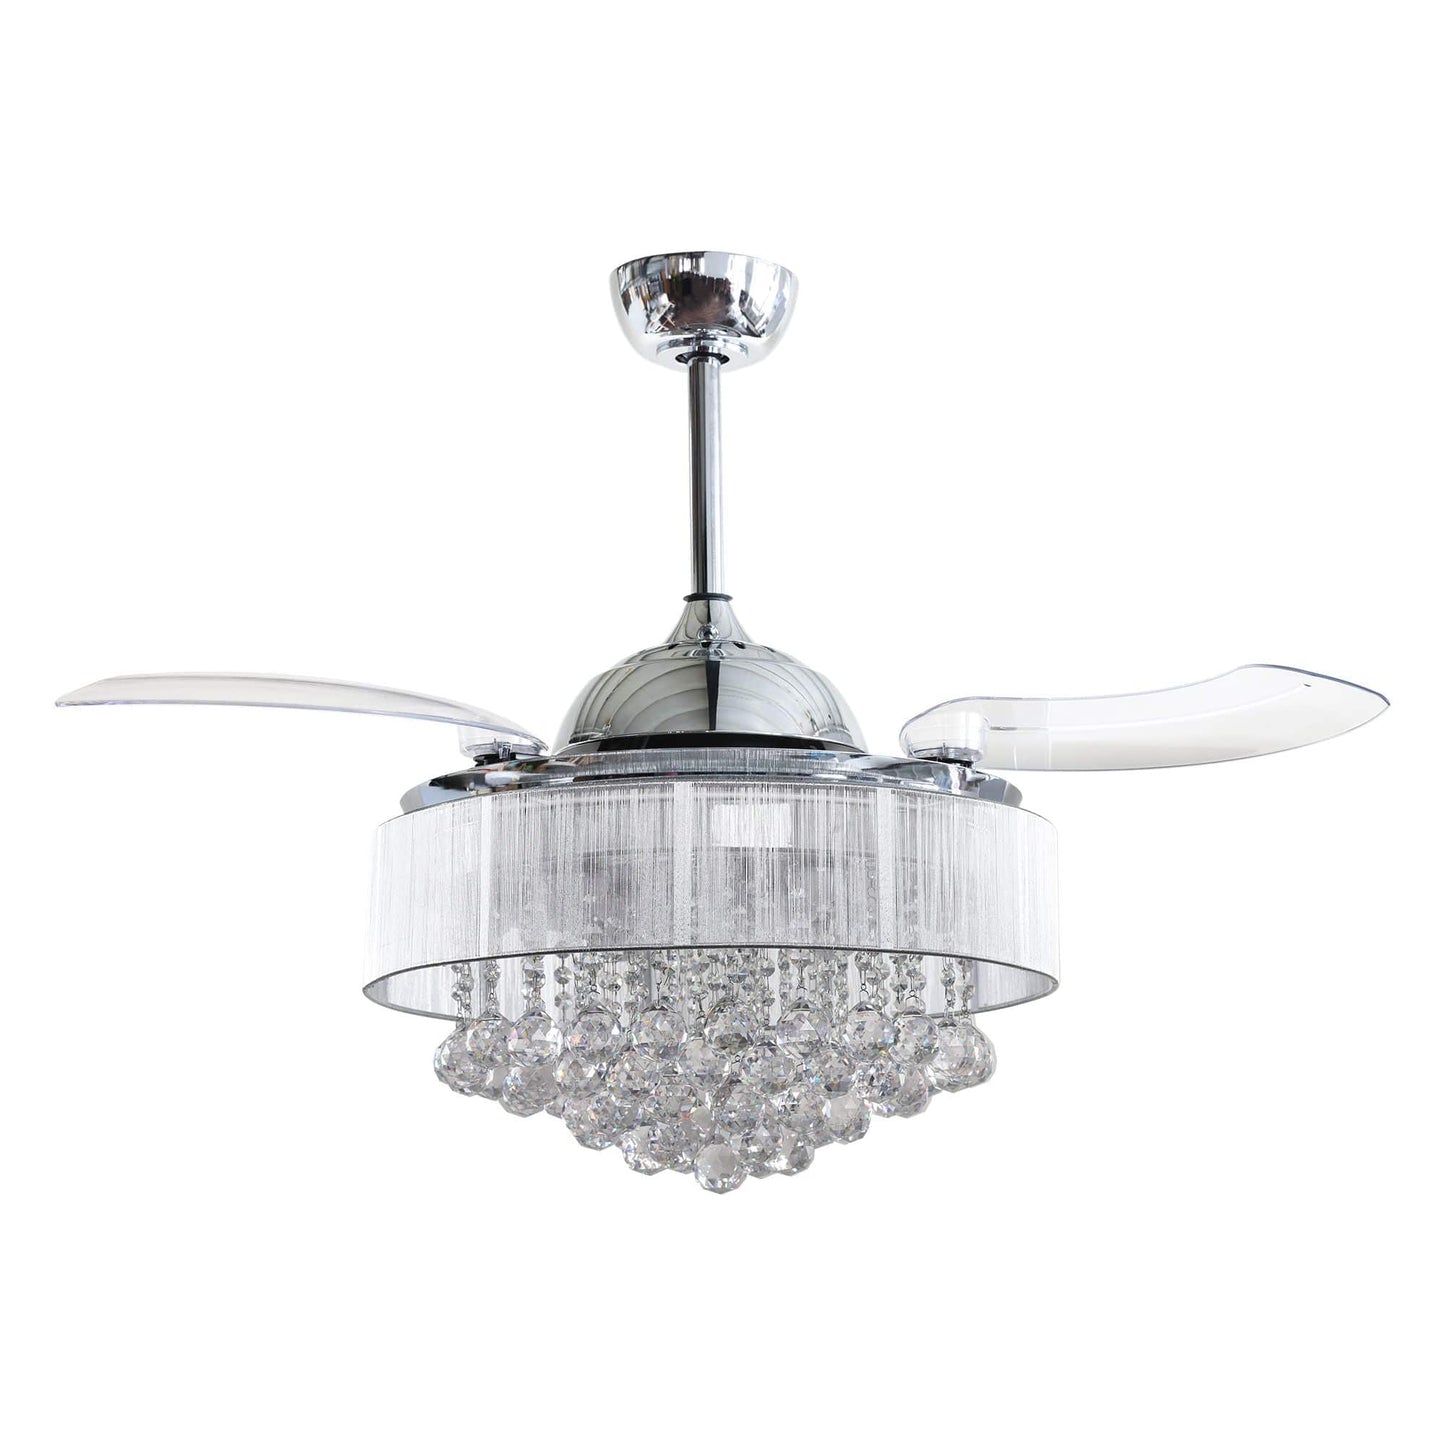 Parrot Uncle 42" Broxburne Modern Chrome Downrod Mount Crystal Ceiling Fan with Lighting and Remote Control